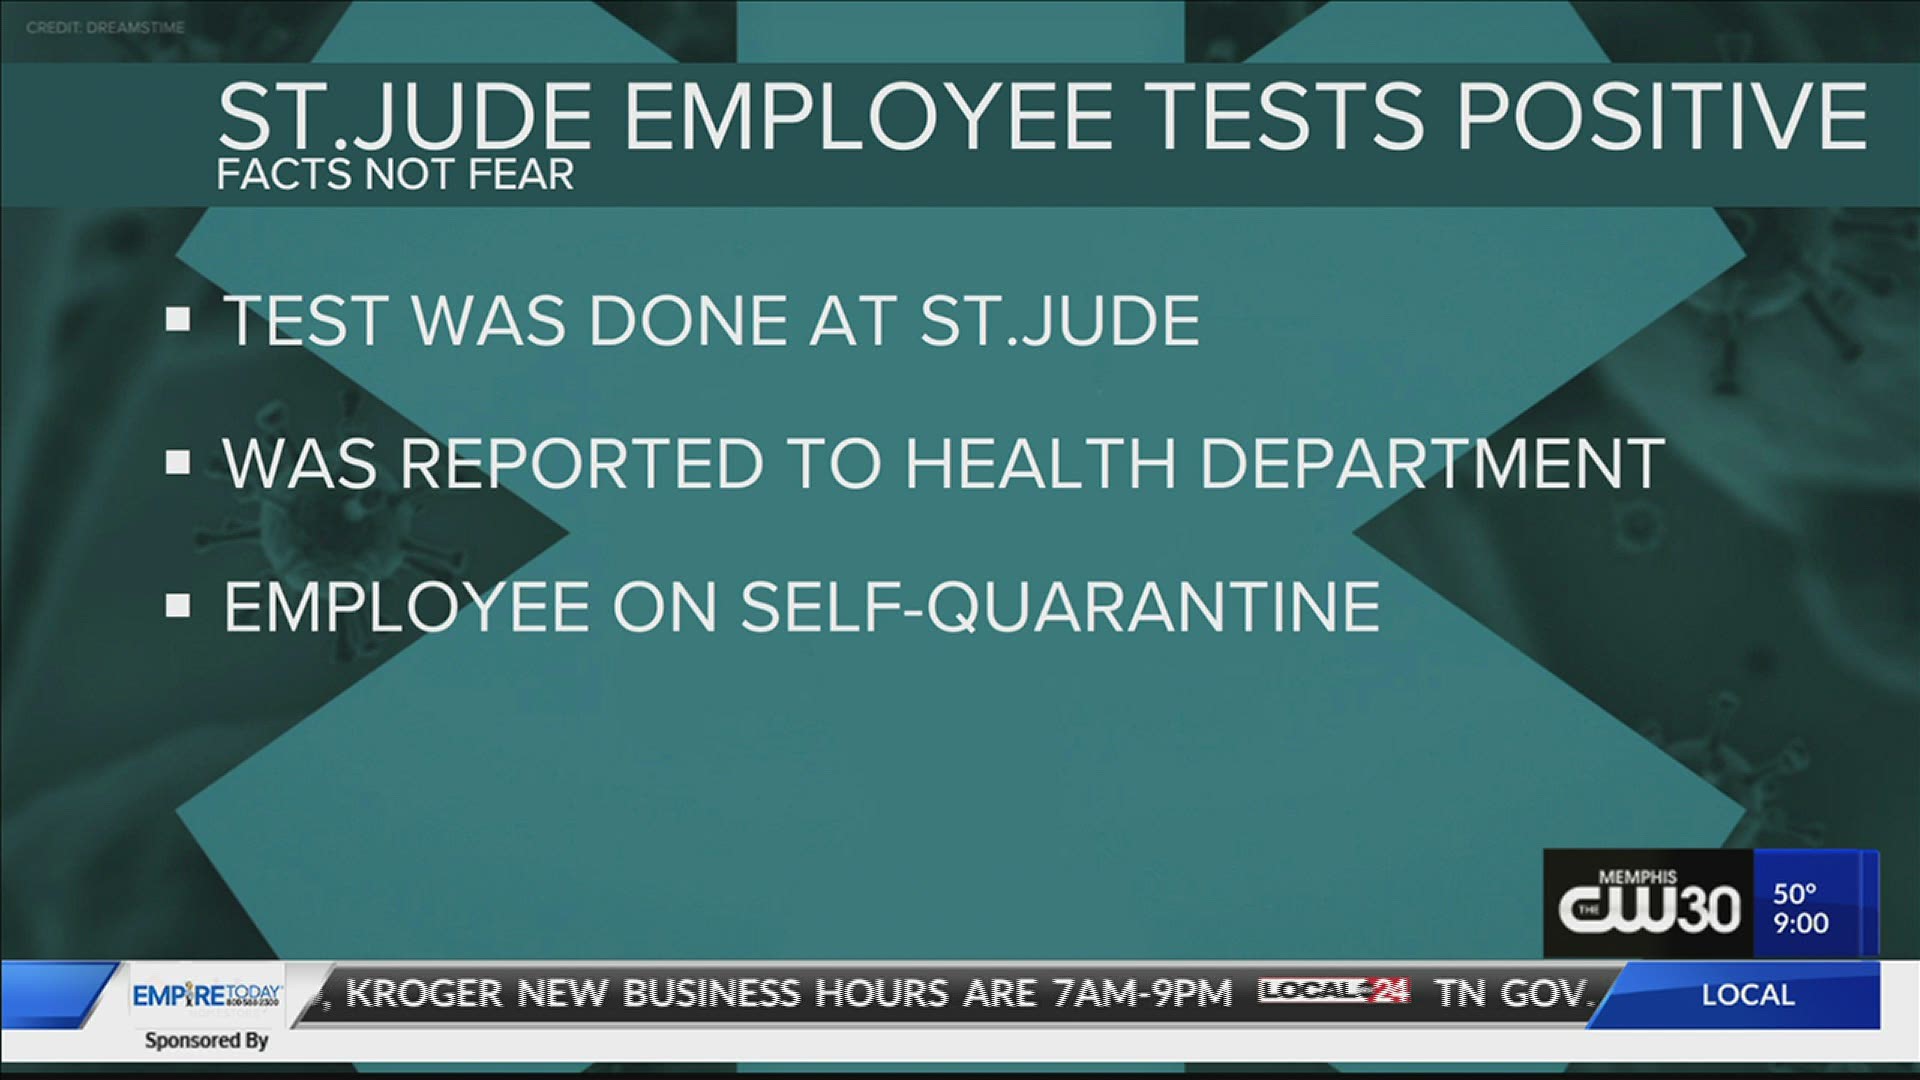 EMPLOYER IS IN SELF QUARANTINED. THERE ARE NO FURTHER DETAILS AT THIS TIME.